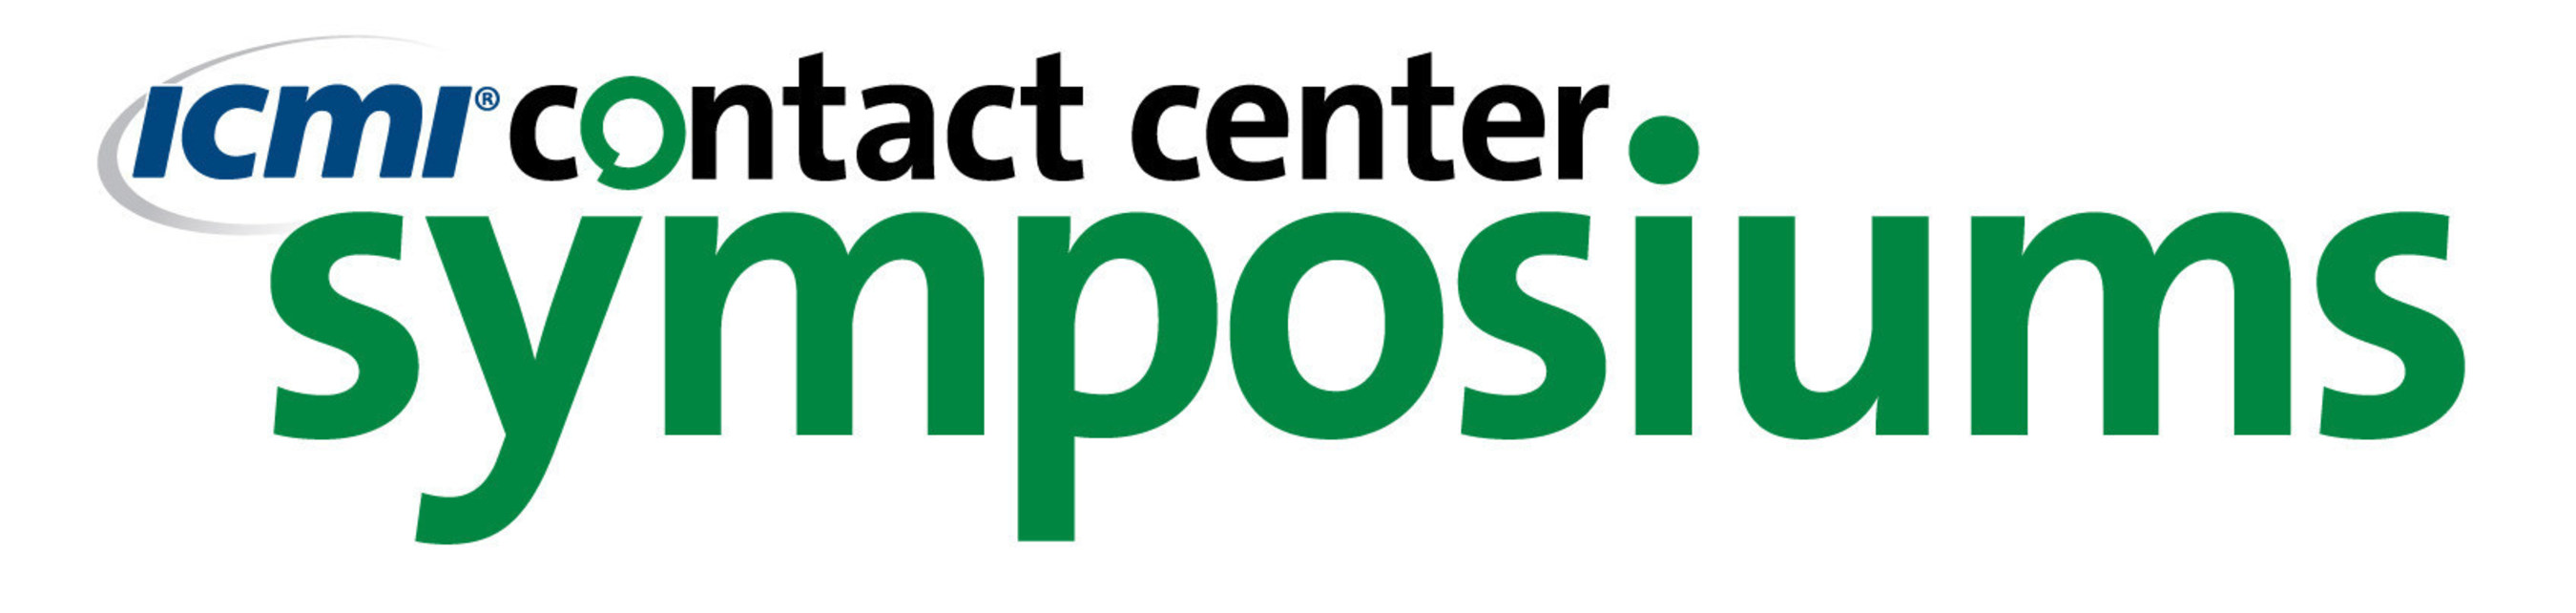 The first 2015 ICMI Contact Center Symposium will take place March 17-20 in San Diego, CA.